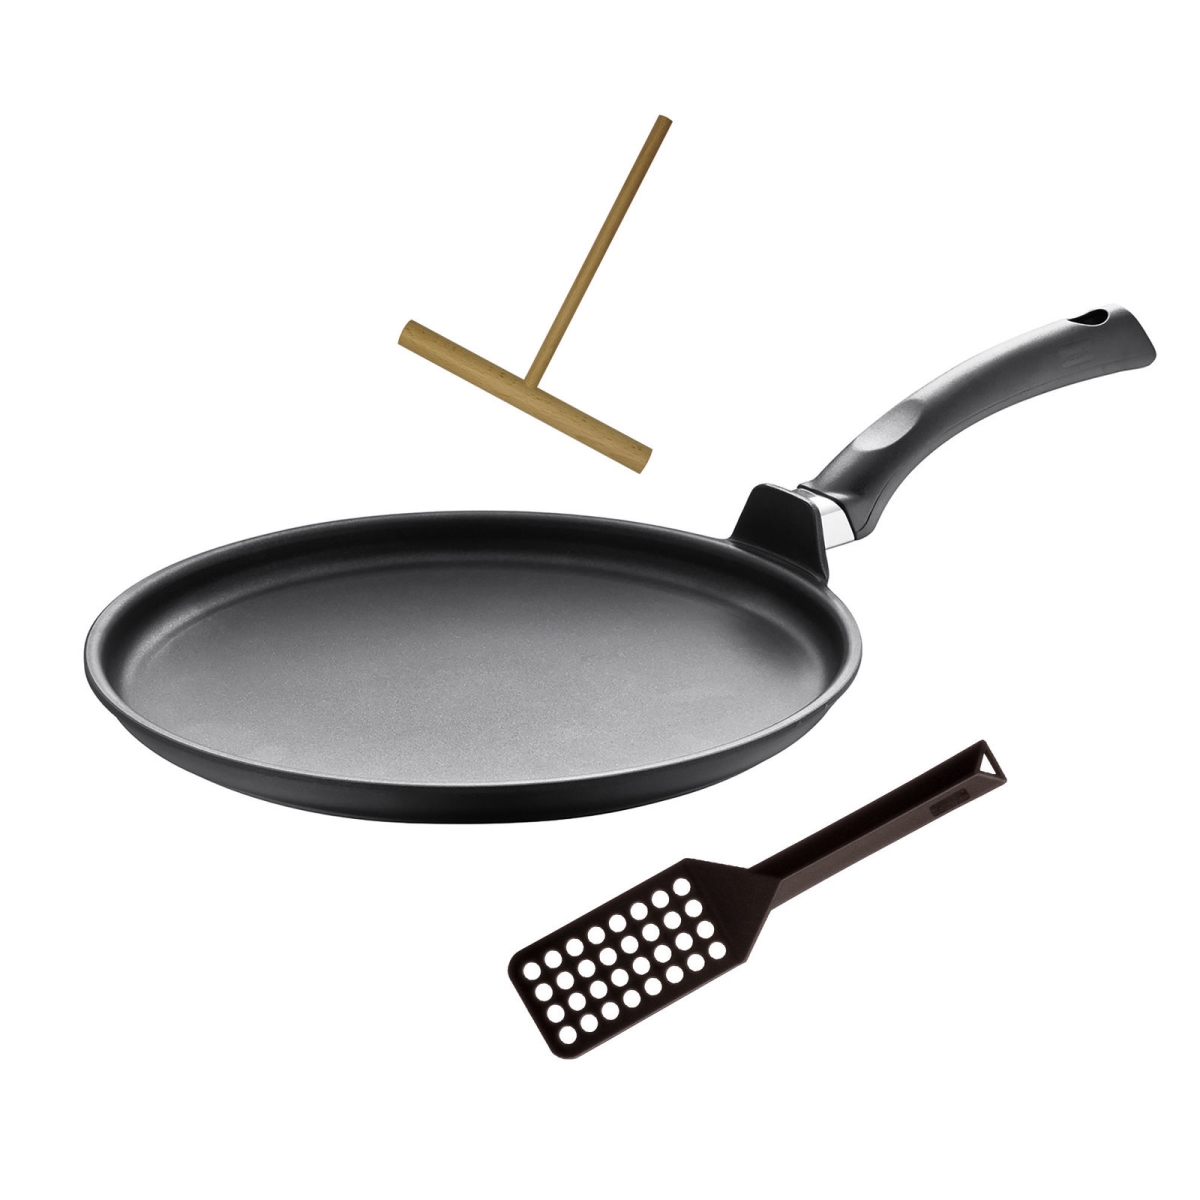 611288t 11.5 In. Specialty Crepe Pan With Tools